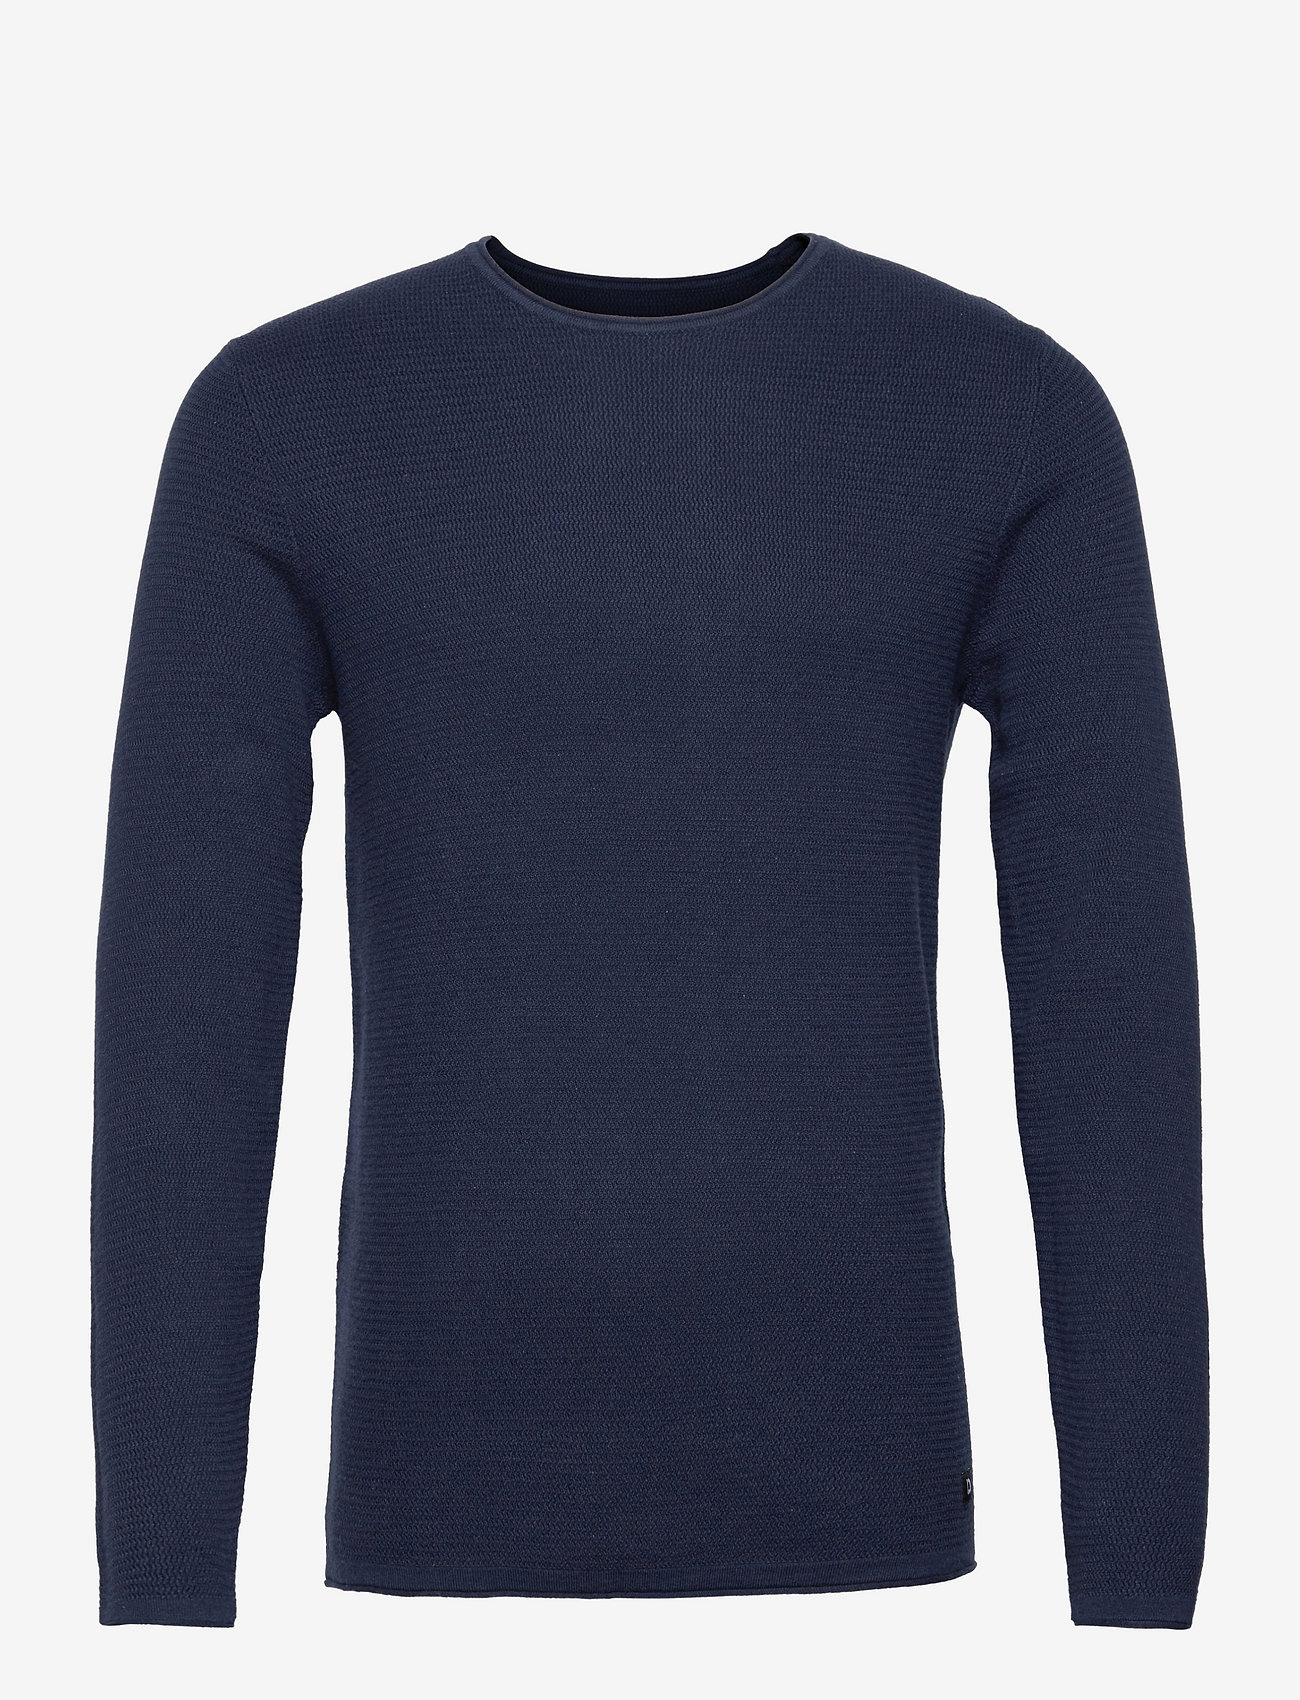 Tom Tailor - zigzag structured crewneck - basic knitwear - sky captain blue non-solid - 0